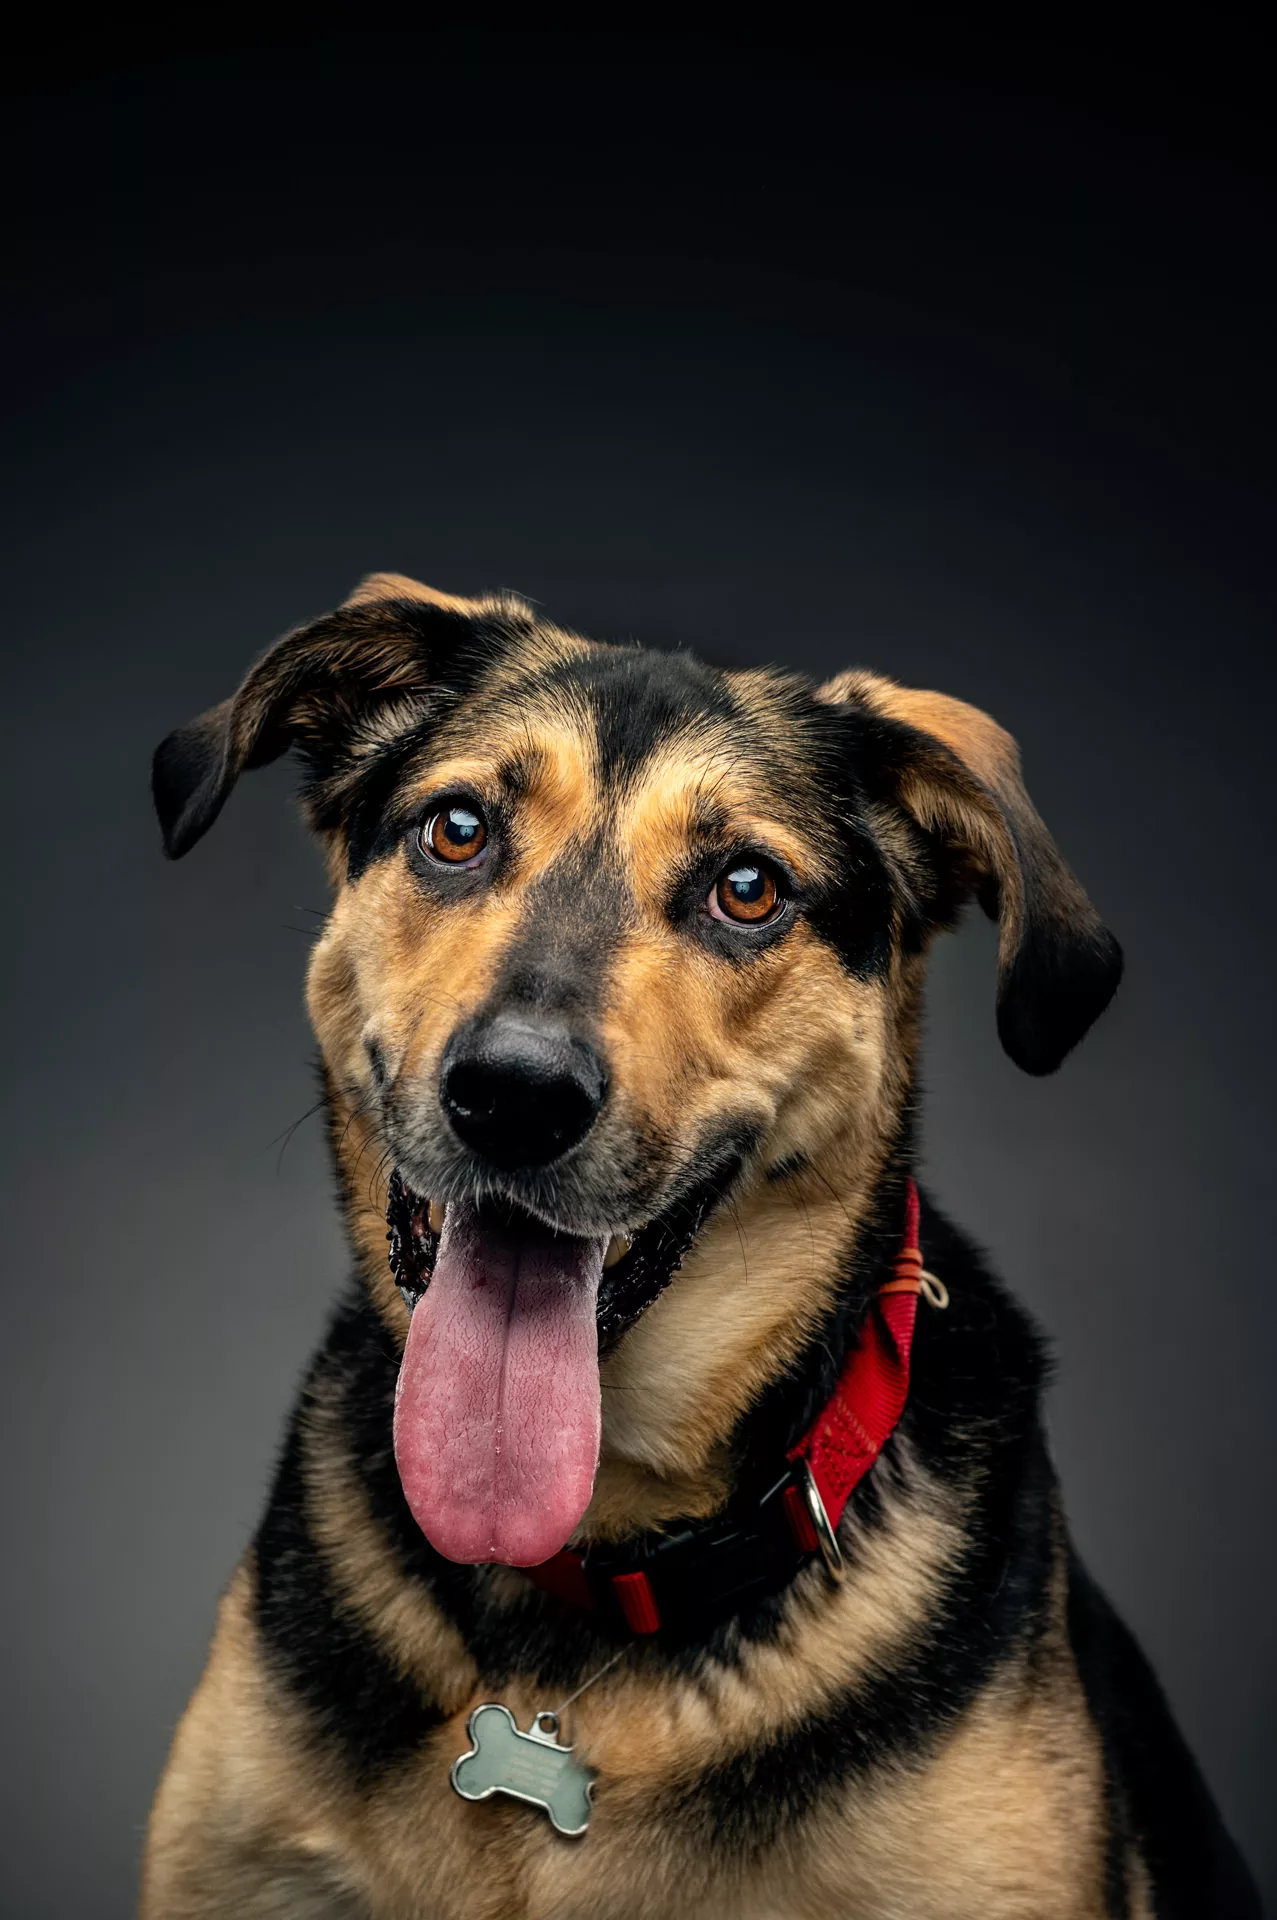 Dog photoshoot in Düsseldorf with a german Schäferhund. Dog is photographed in a studio frontwards with his tongue out.